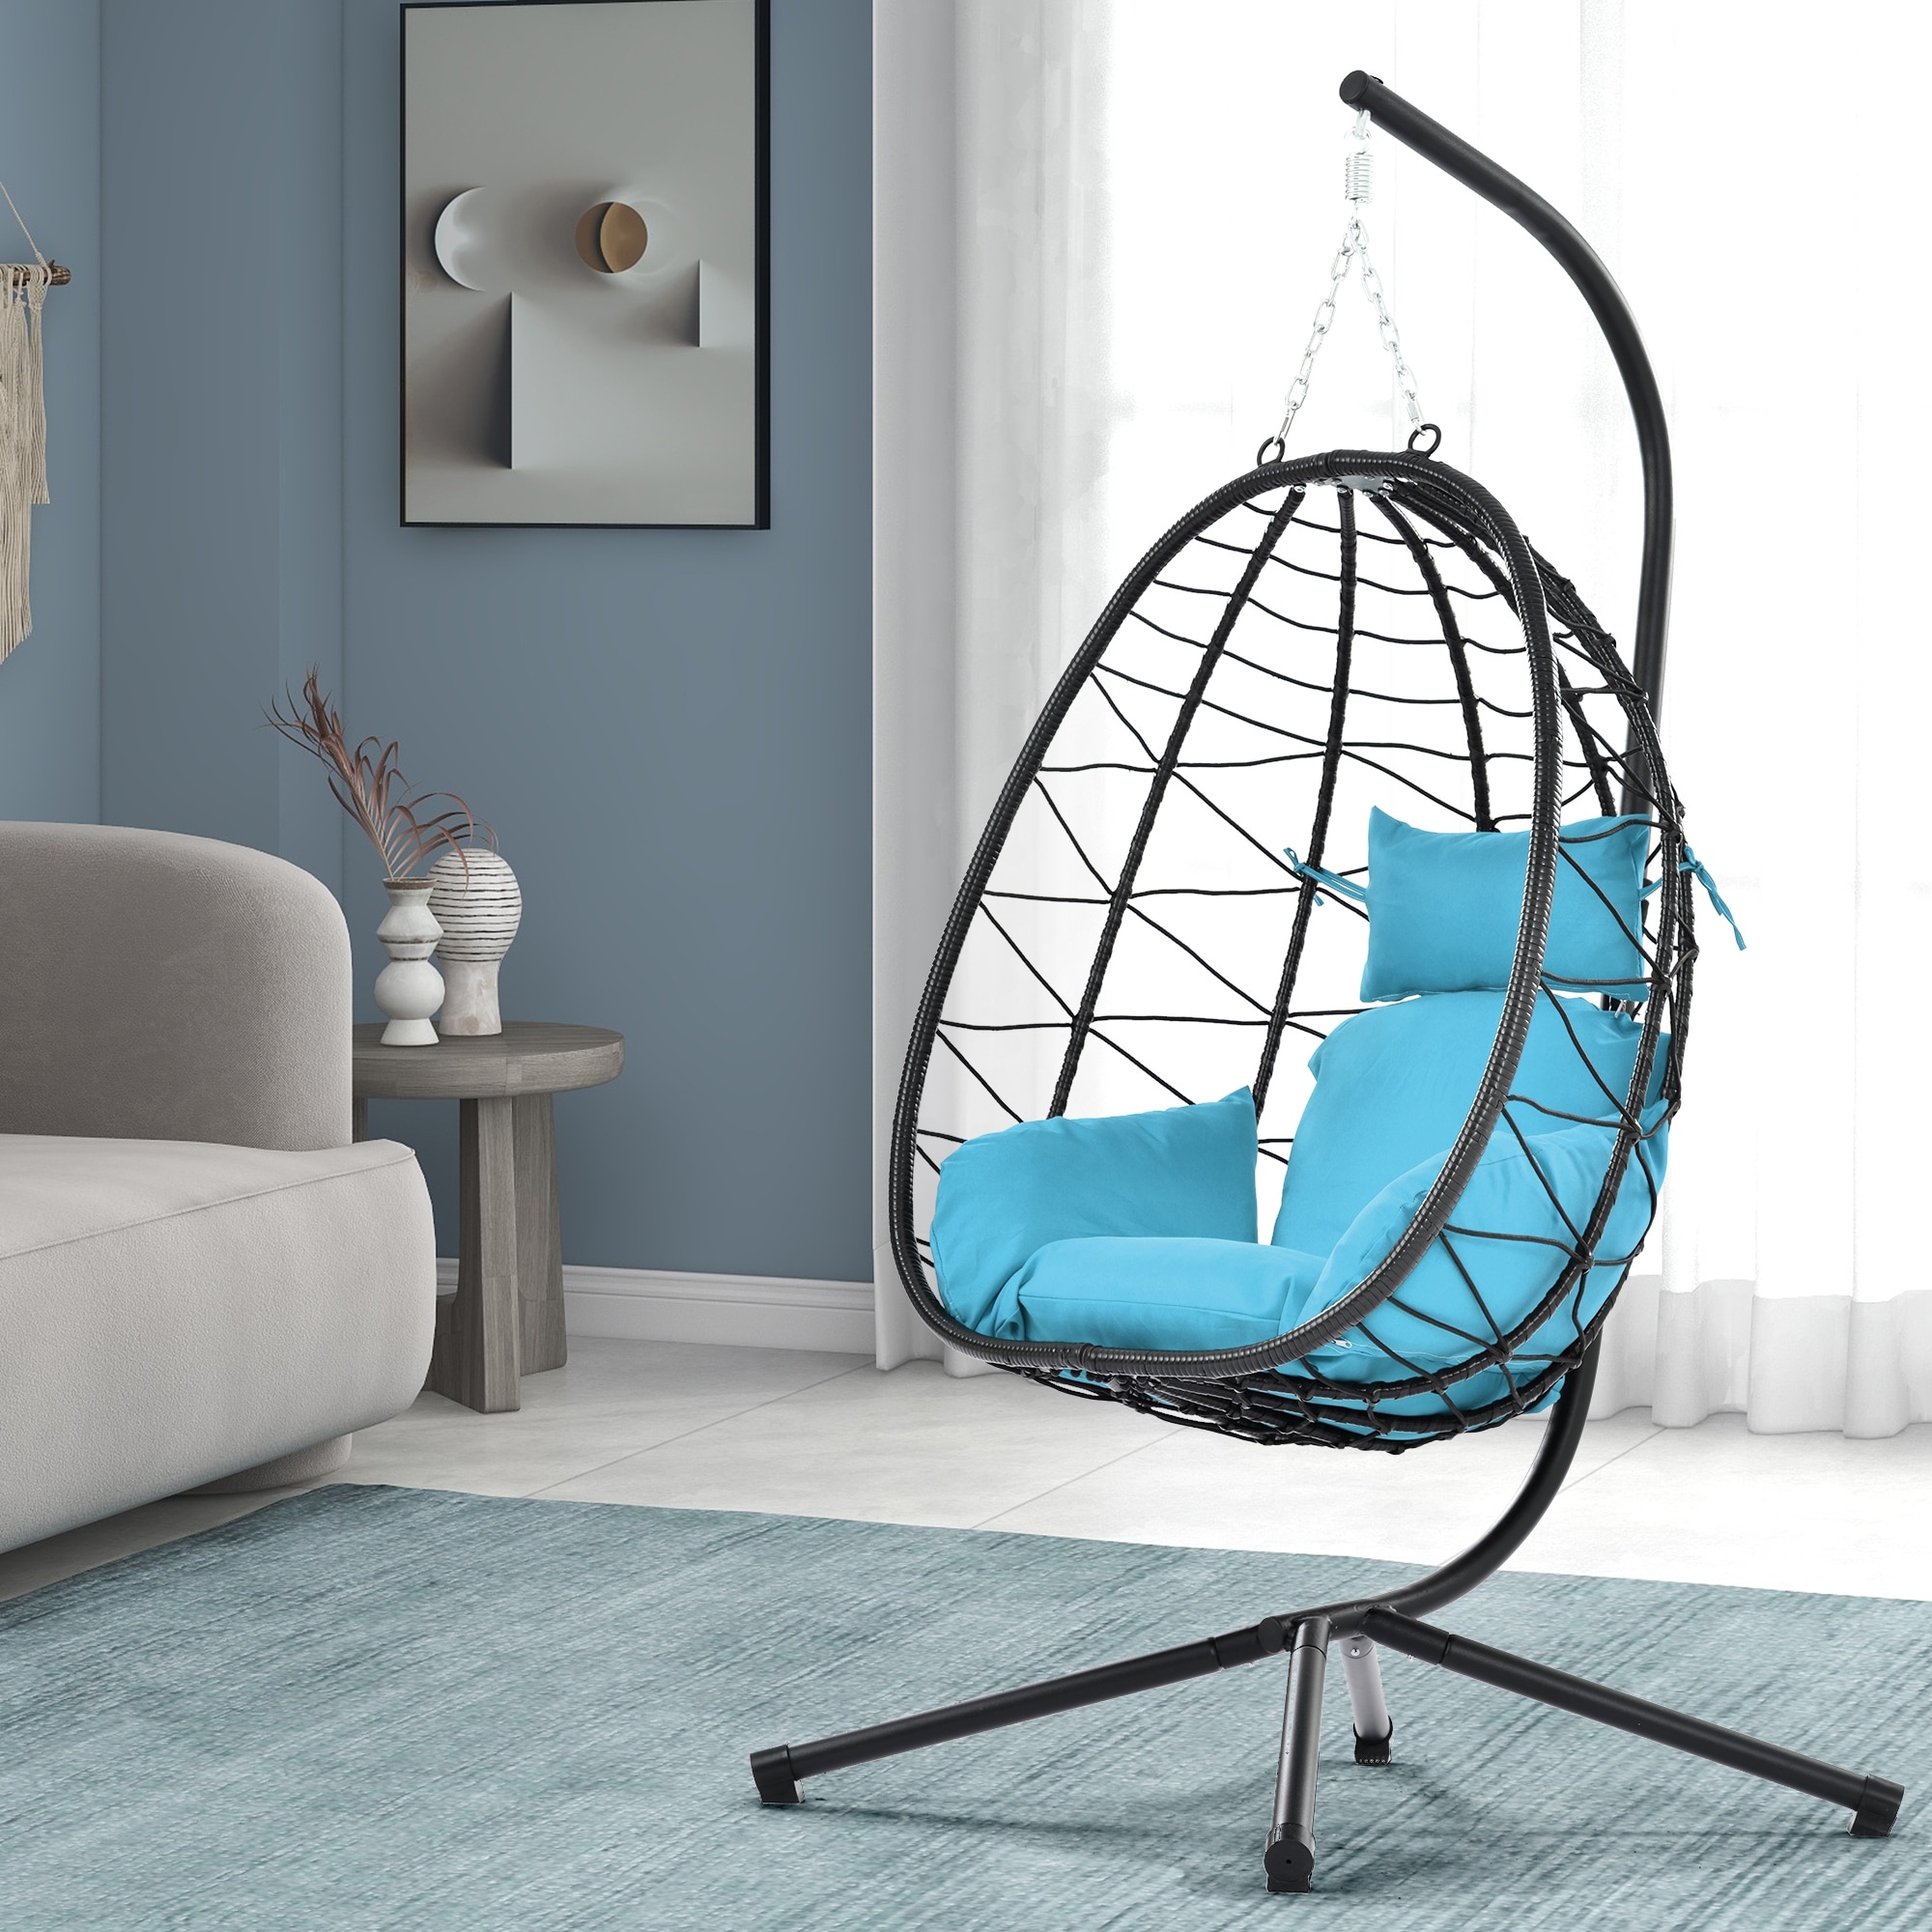 https://ak1.ostkcdn.com/images/products/is/images/direct/076f2865cff30a1ebbaa15788d624ecdfe3e43e1/Indoor-Outdoor-Egg-Chair-with-Stand-and-Waterproof-Cushion.jpg